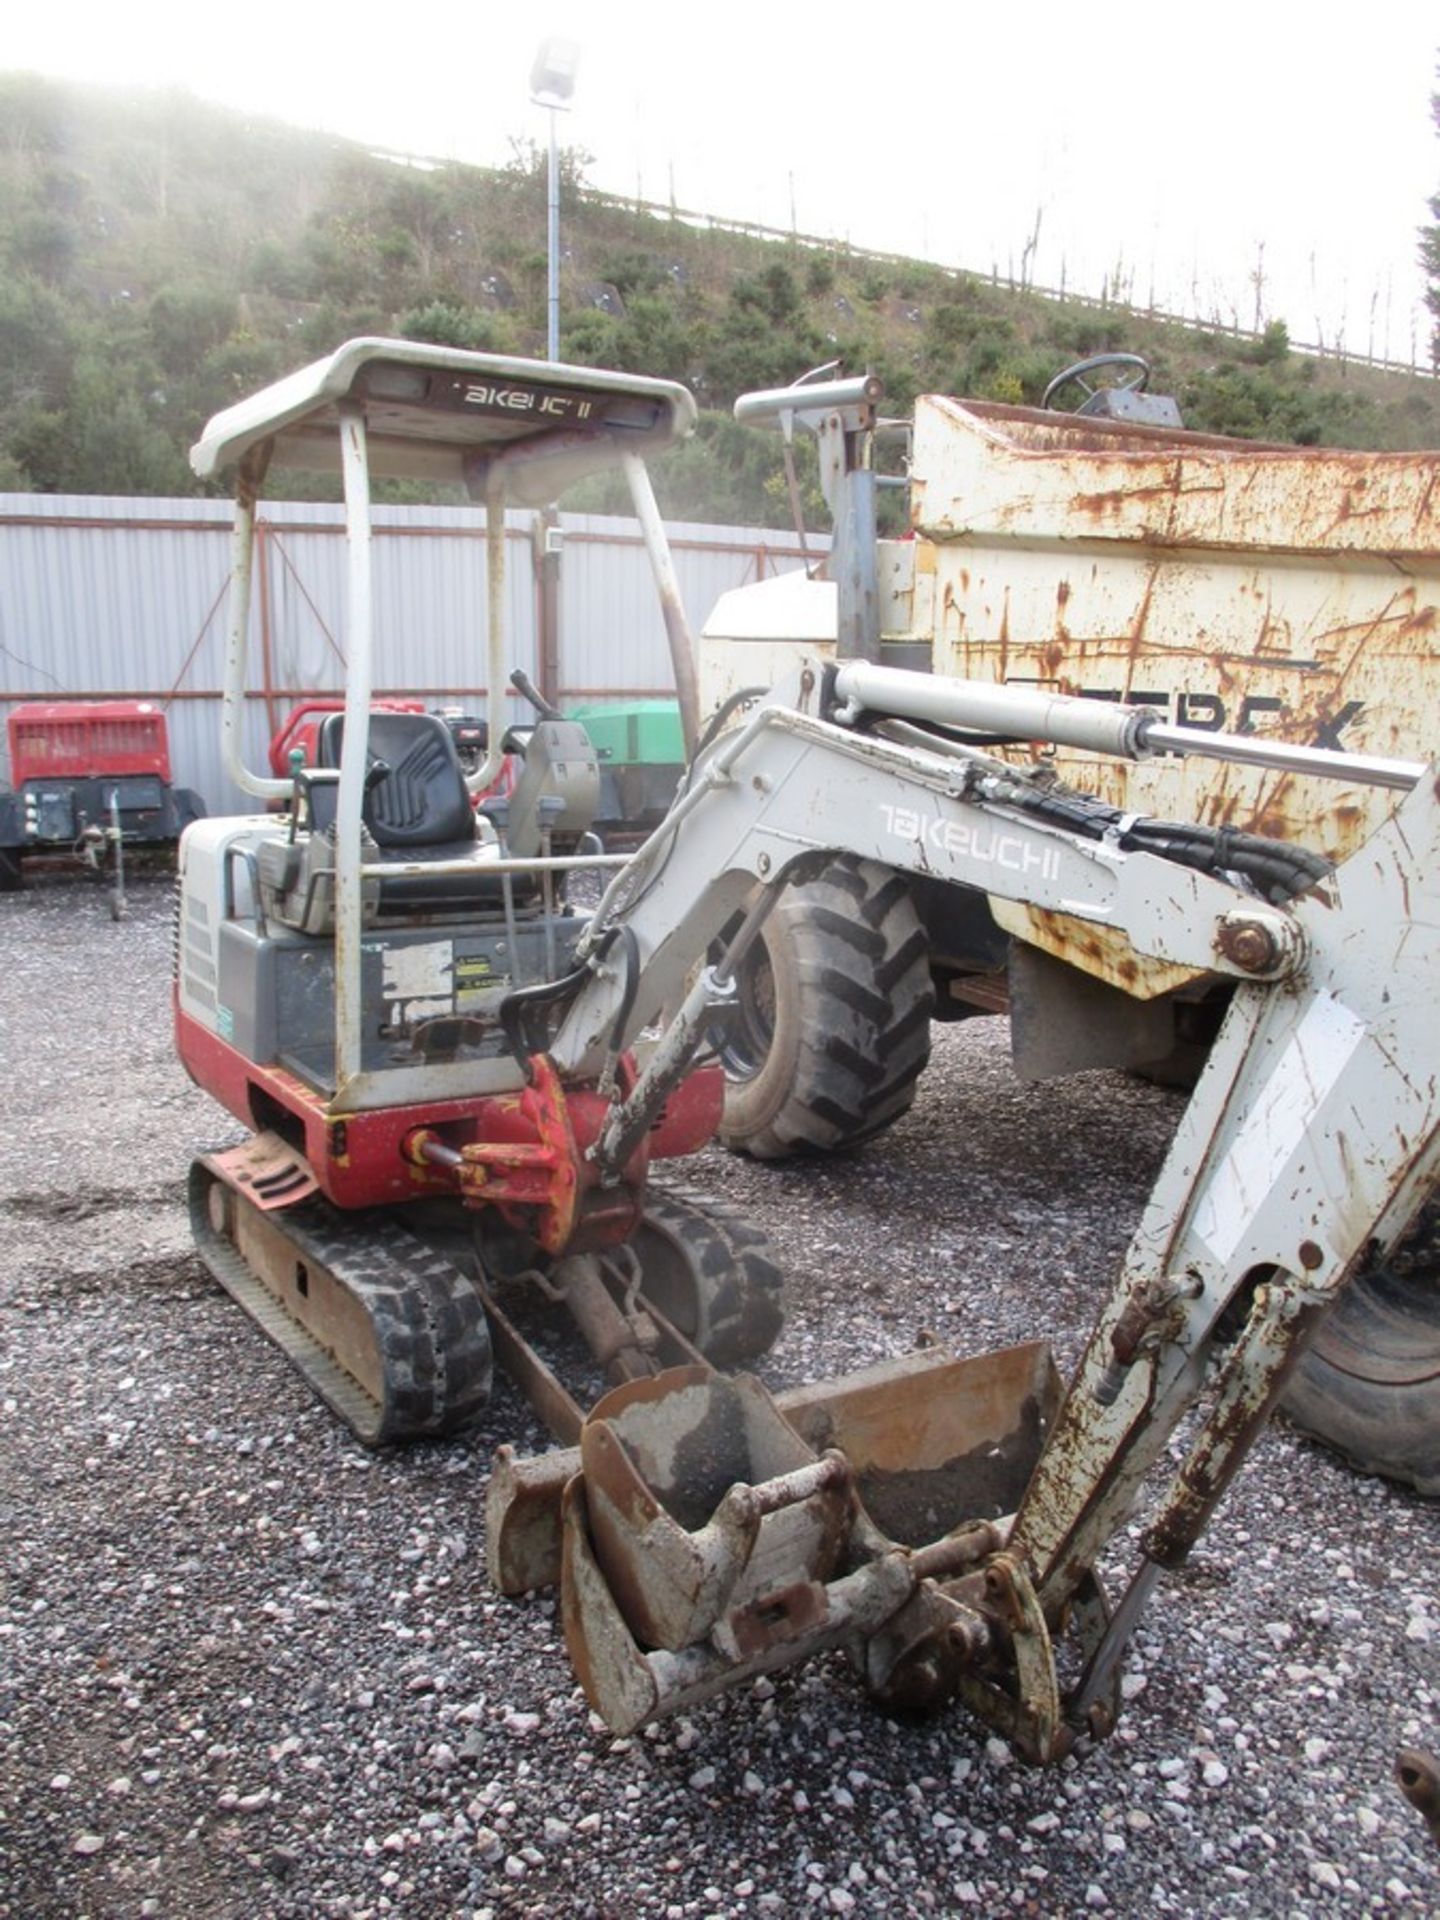 TAKEUCHI TB016 C/W 2 BUCKETS 4888HRS (TO BE SOLD AFTER LOT 1340) - Image 2 of 4